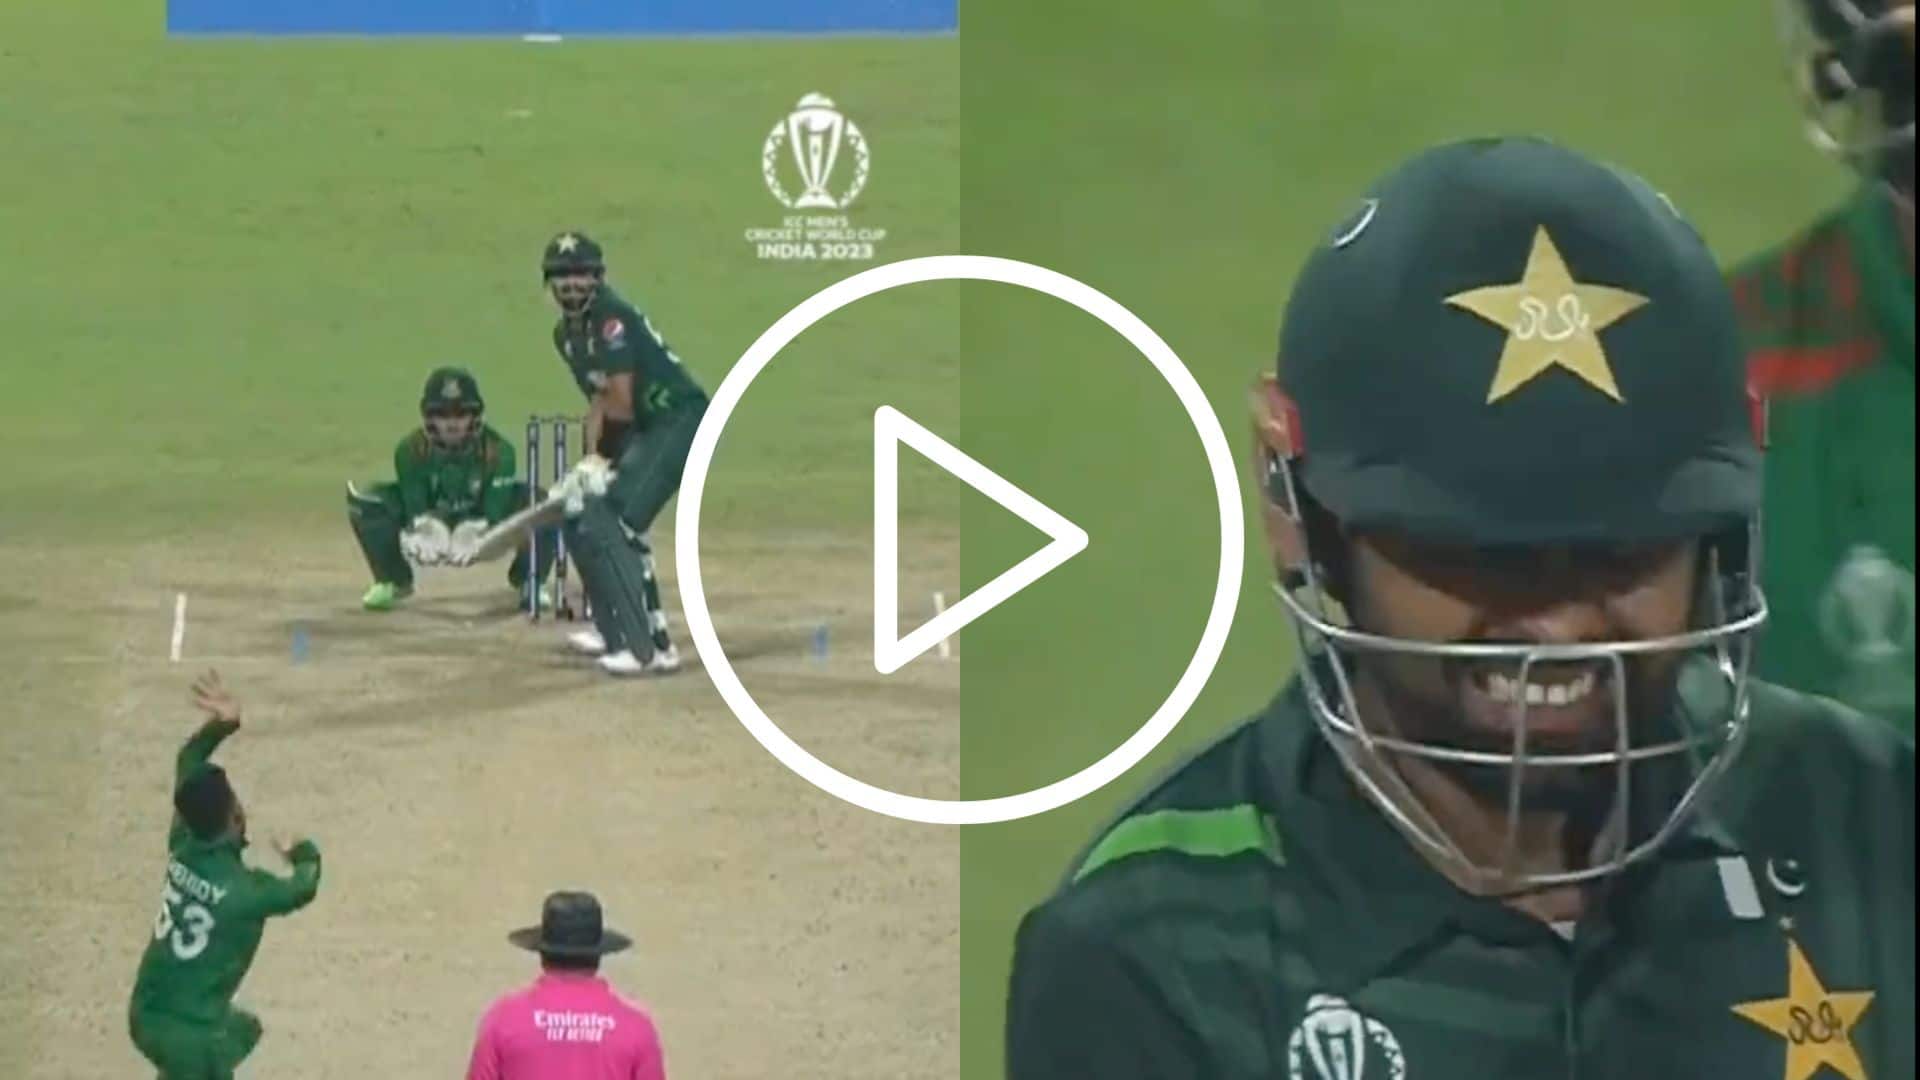 [Watch] Babar Azam ‘Gutted’ As Mehidy Hasan Miraz Gets ‘The Big Fish’ With A Beauty